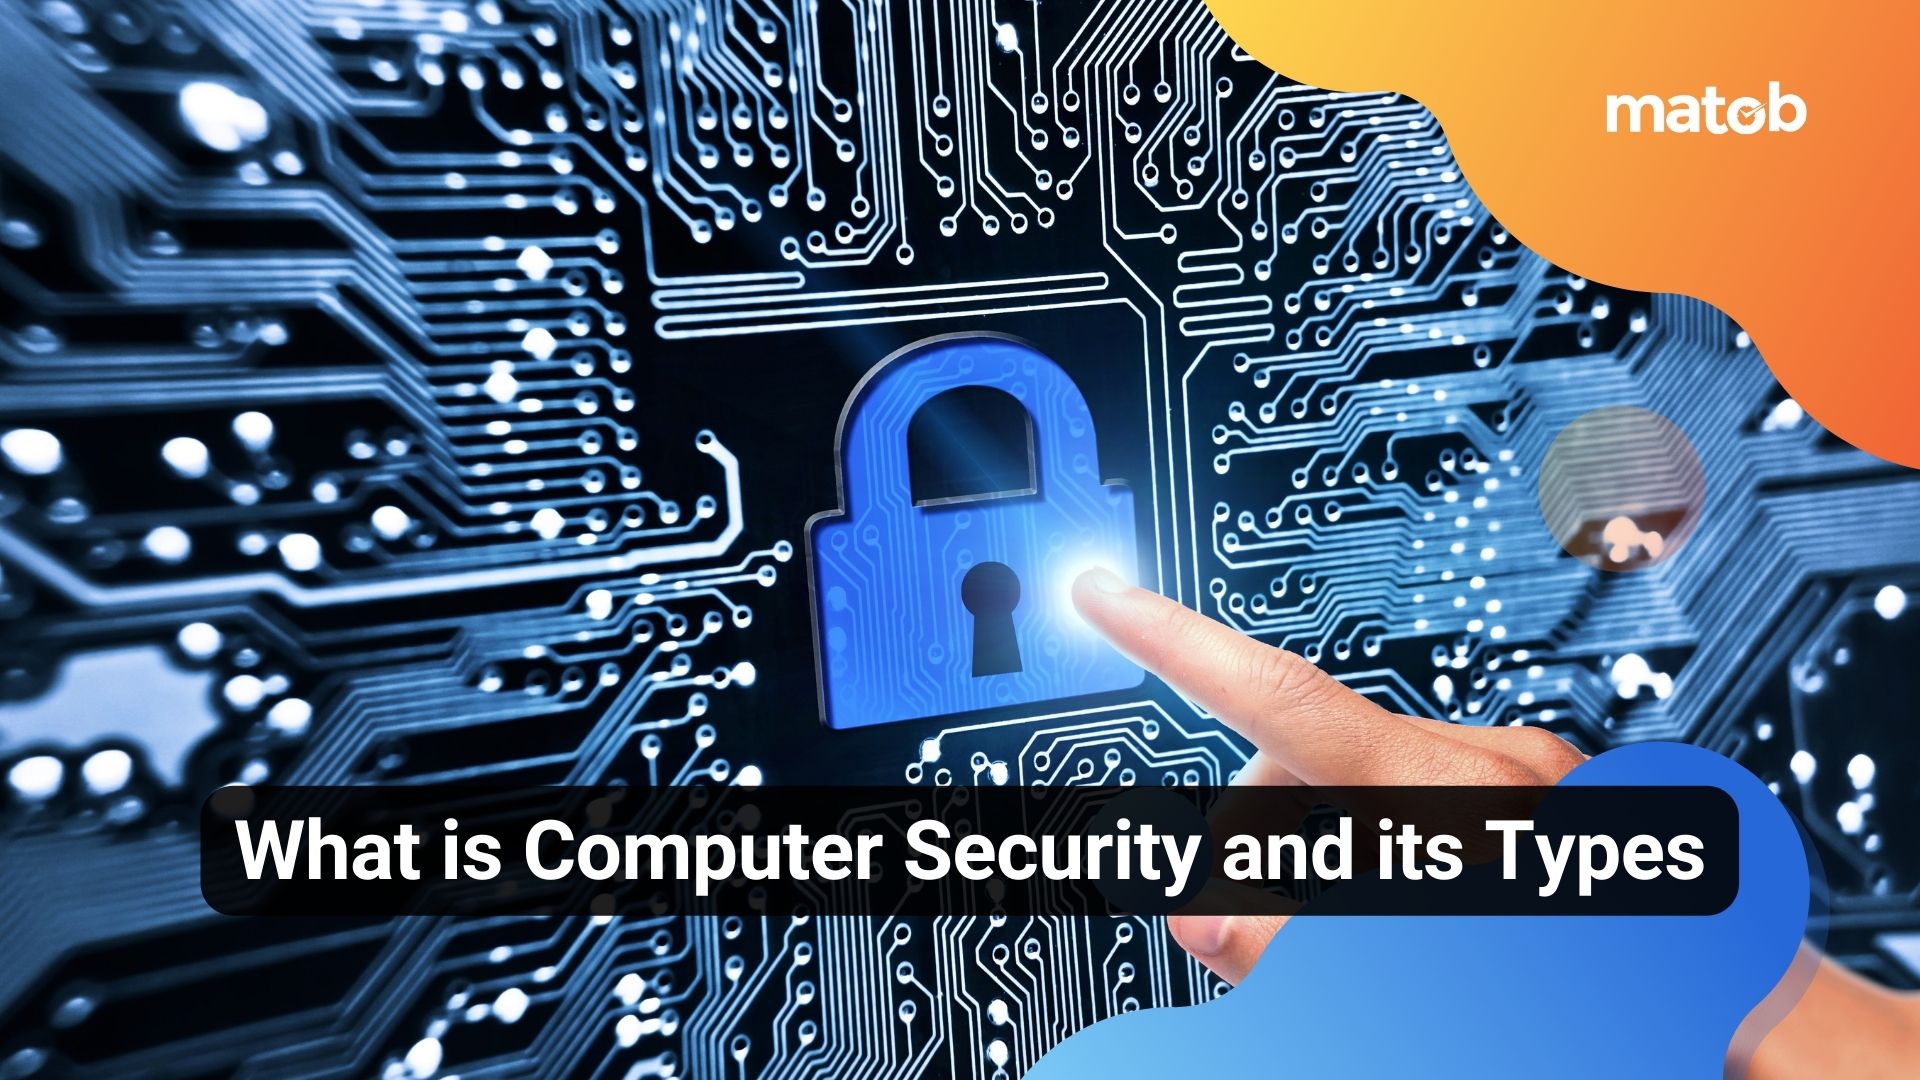 What is Computer Security and its Types